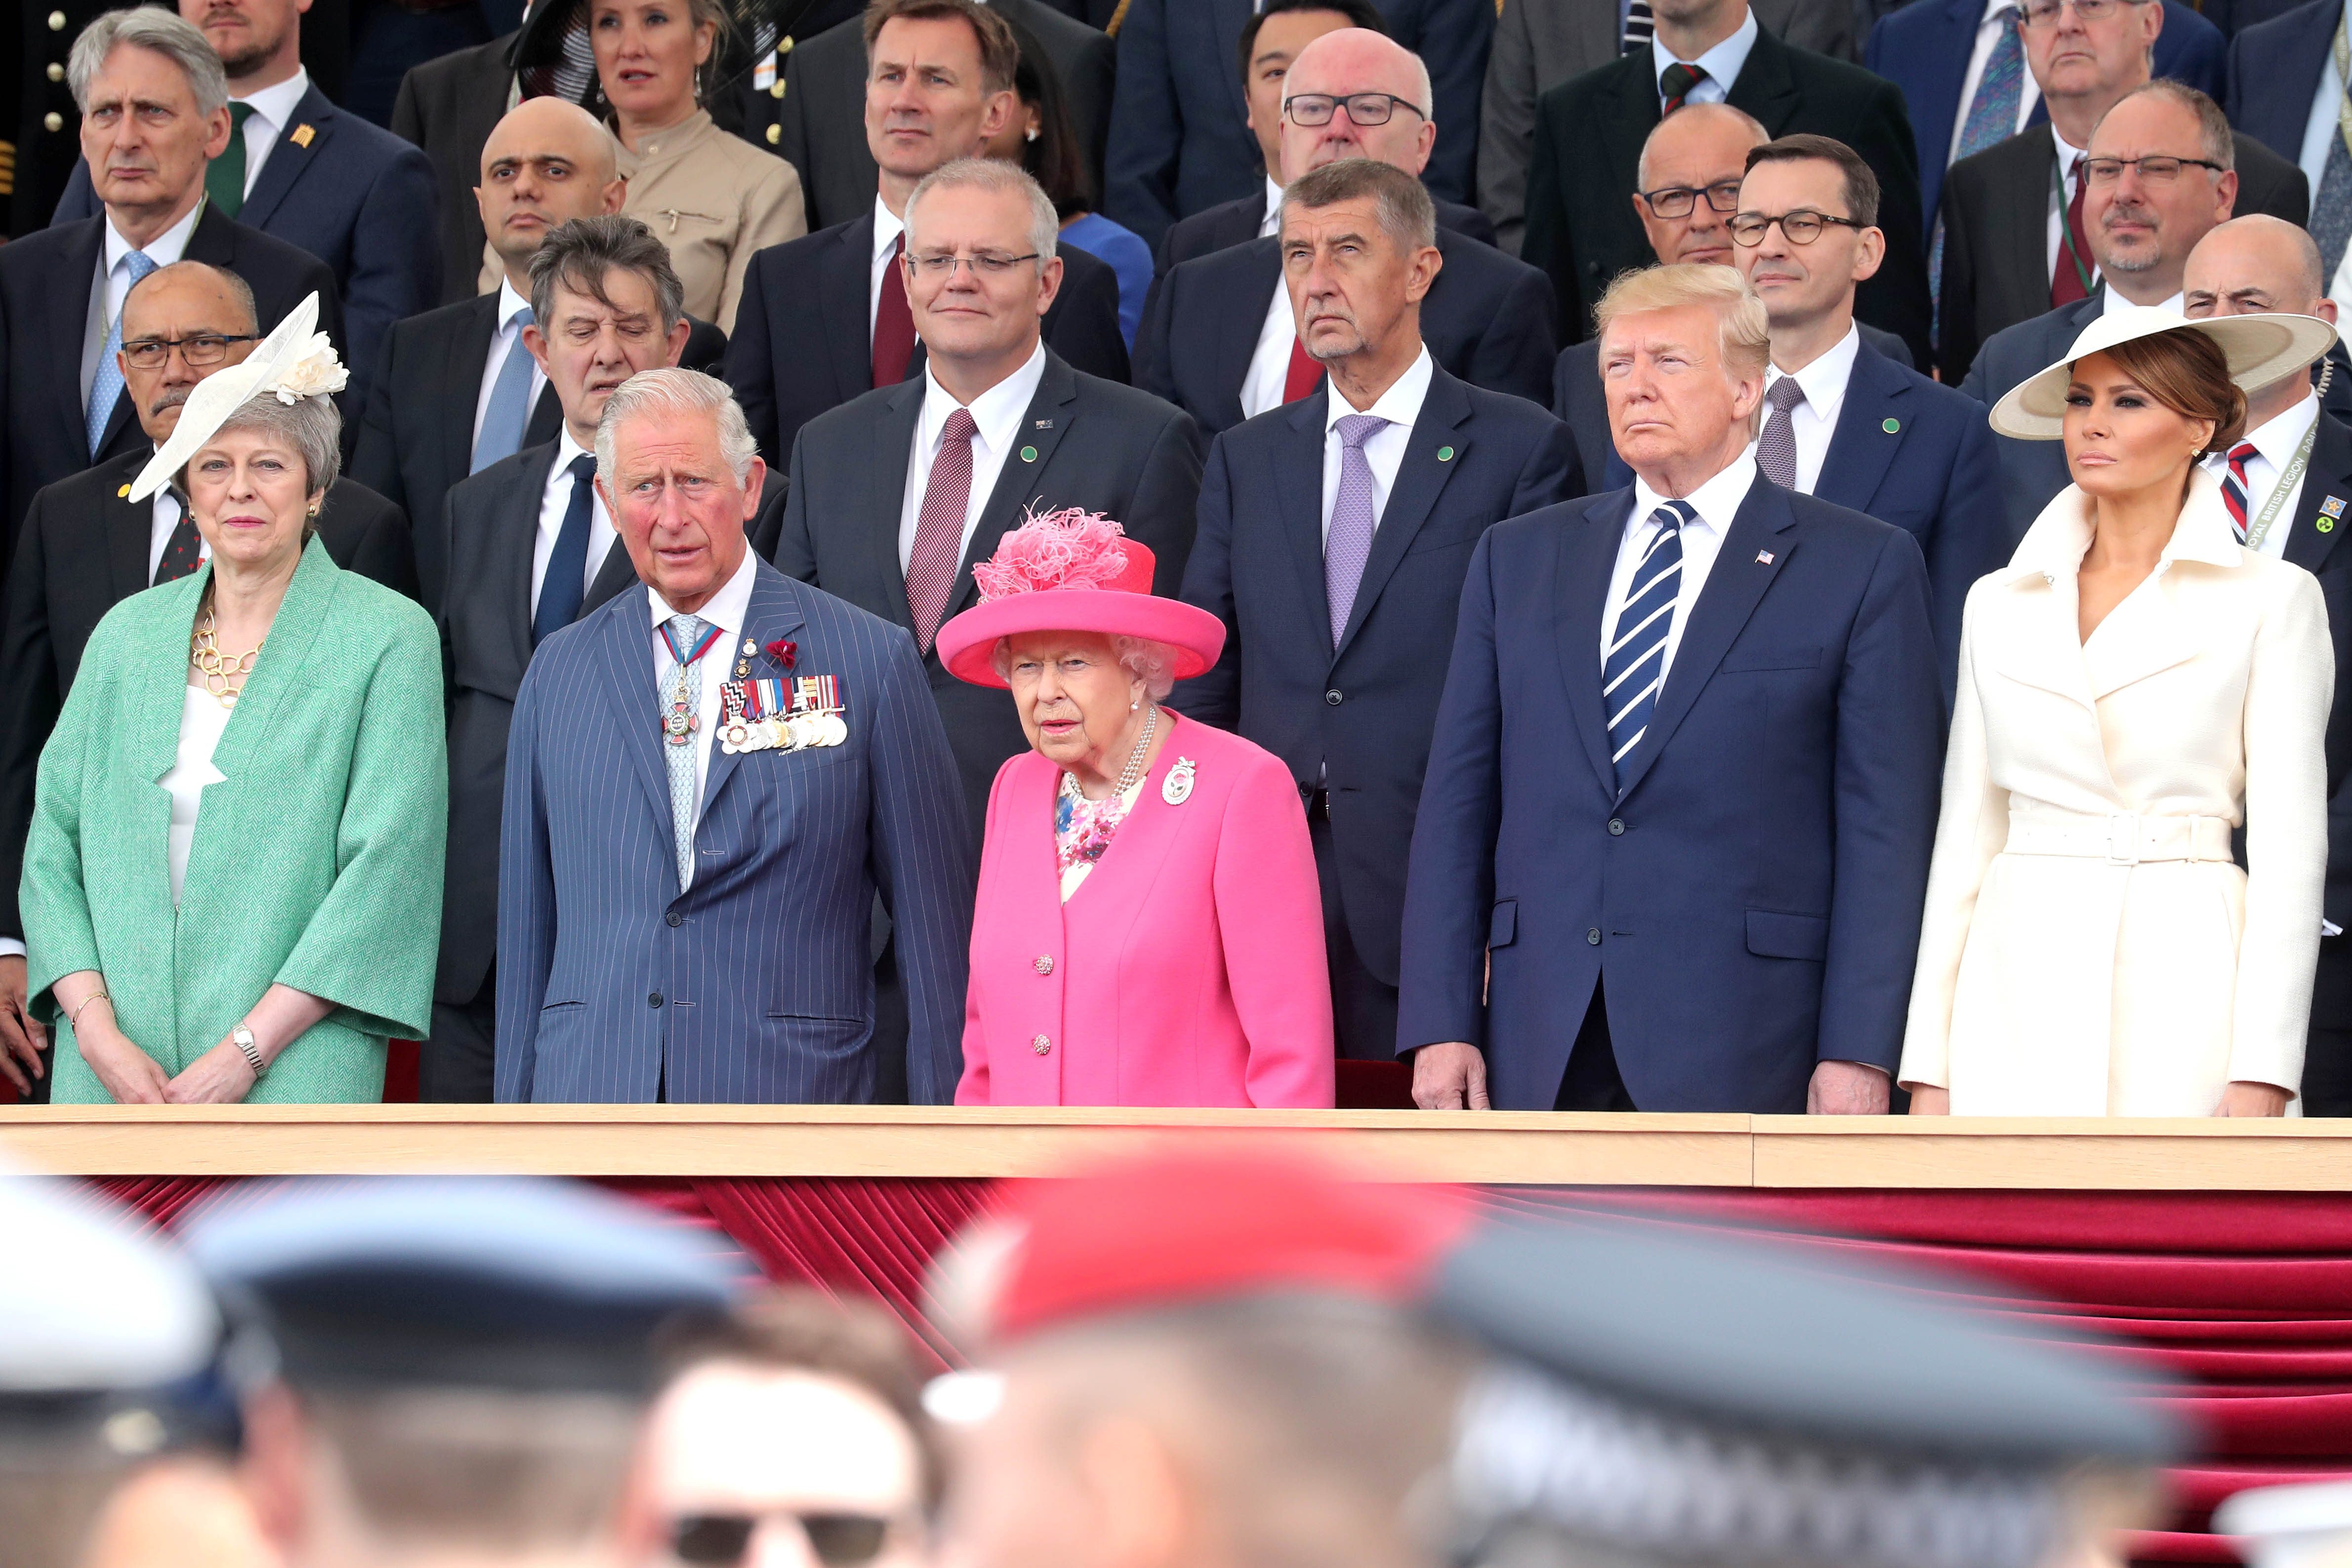 In 2019, British Prime Minister Theresa May, Prince of Wales Prince Charles, Queen Elizabeth II, President Donald Trump and First Lady of Melania Trump attended the D-day 75 Commemorations on June 05 in Portsmouth, England.